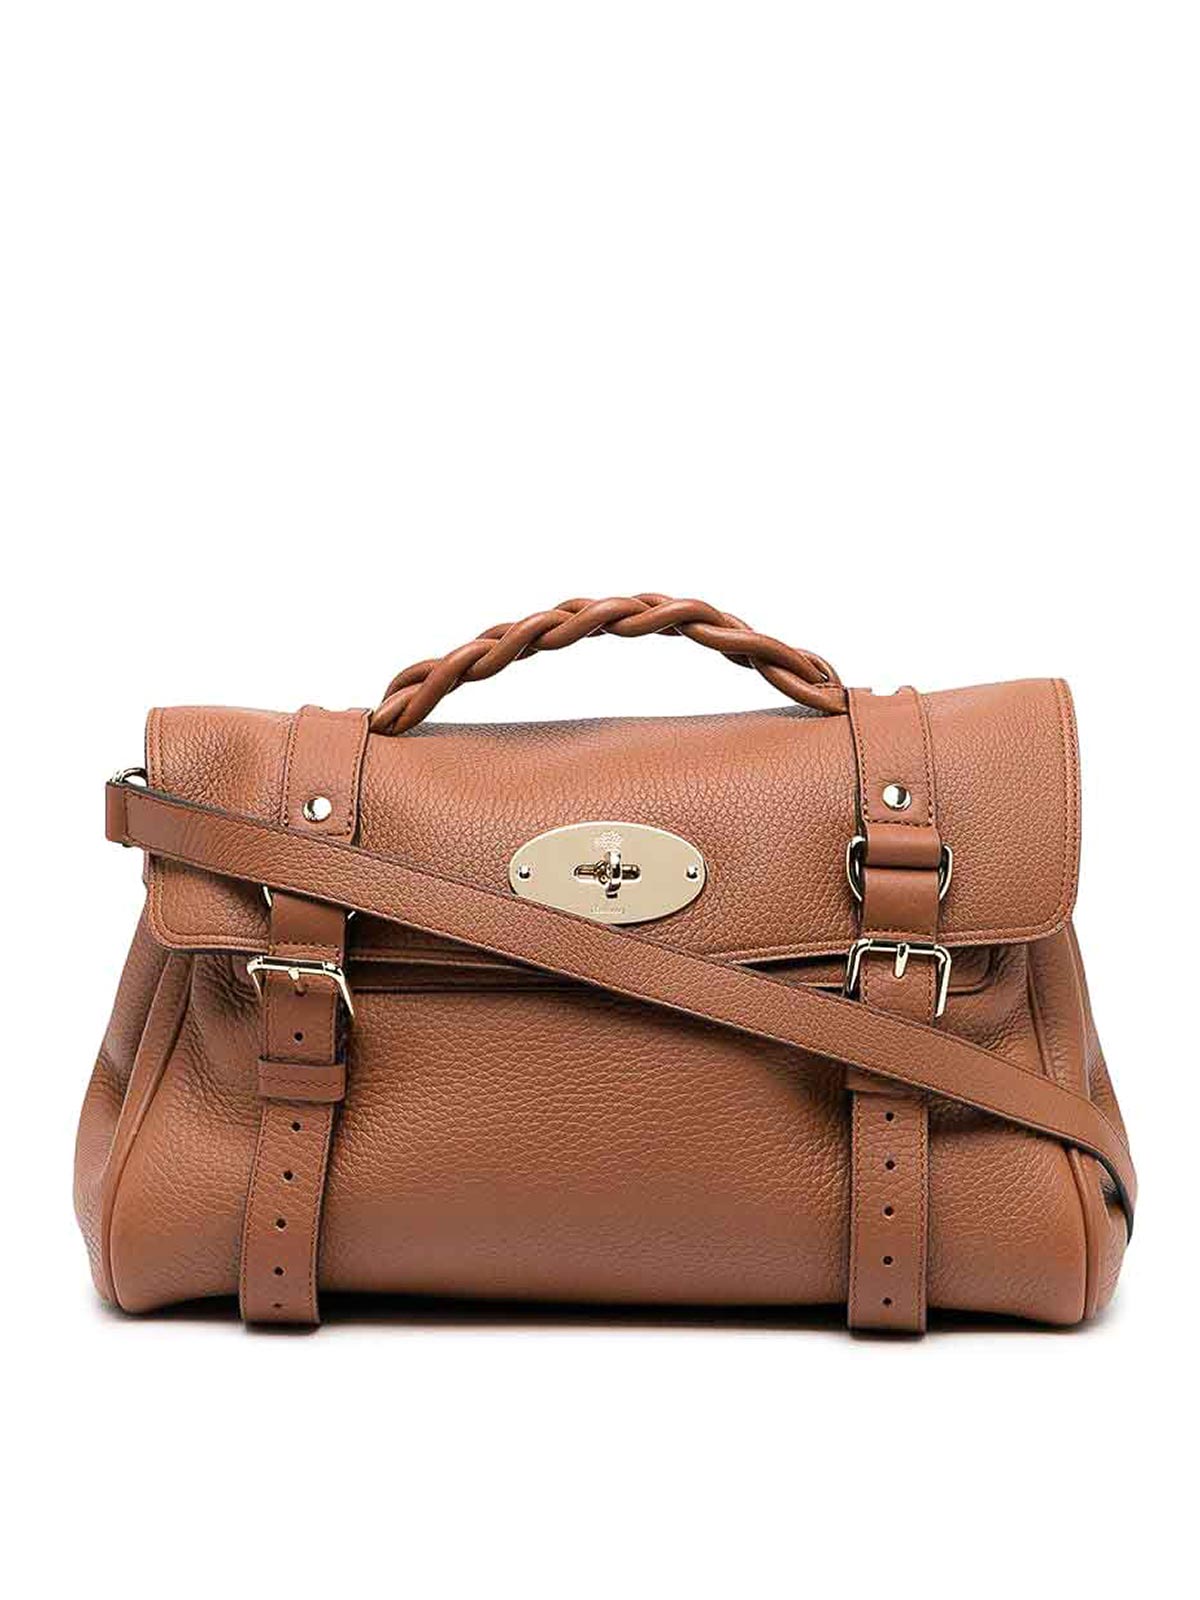 Mulberry Alexa Bag In Brown